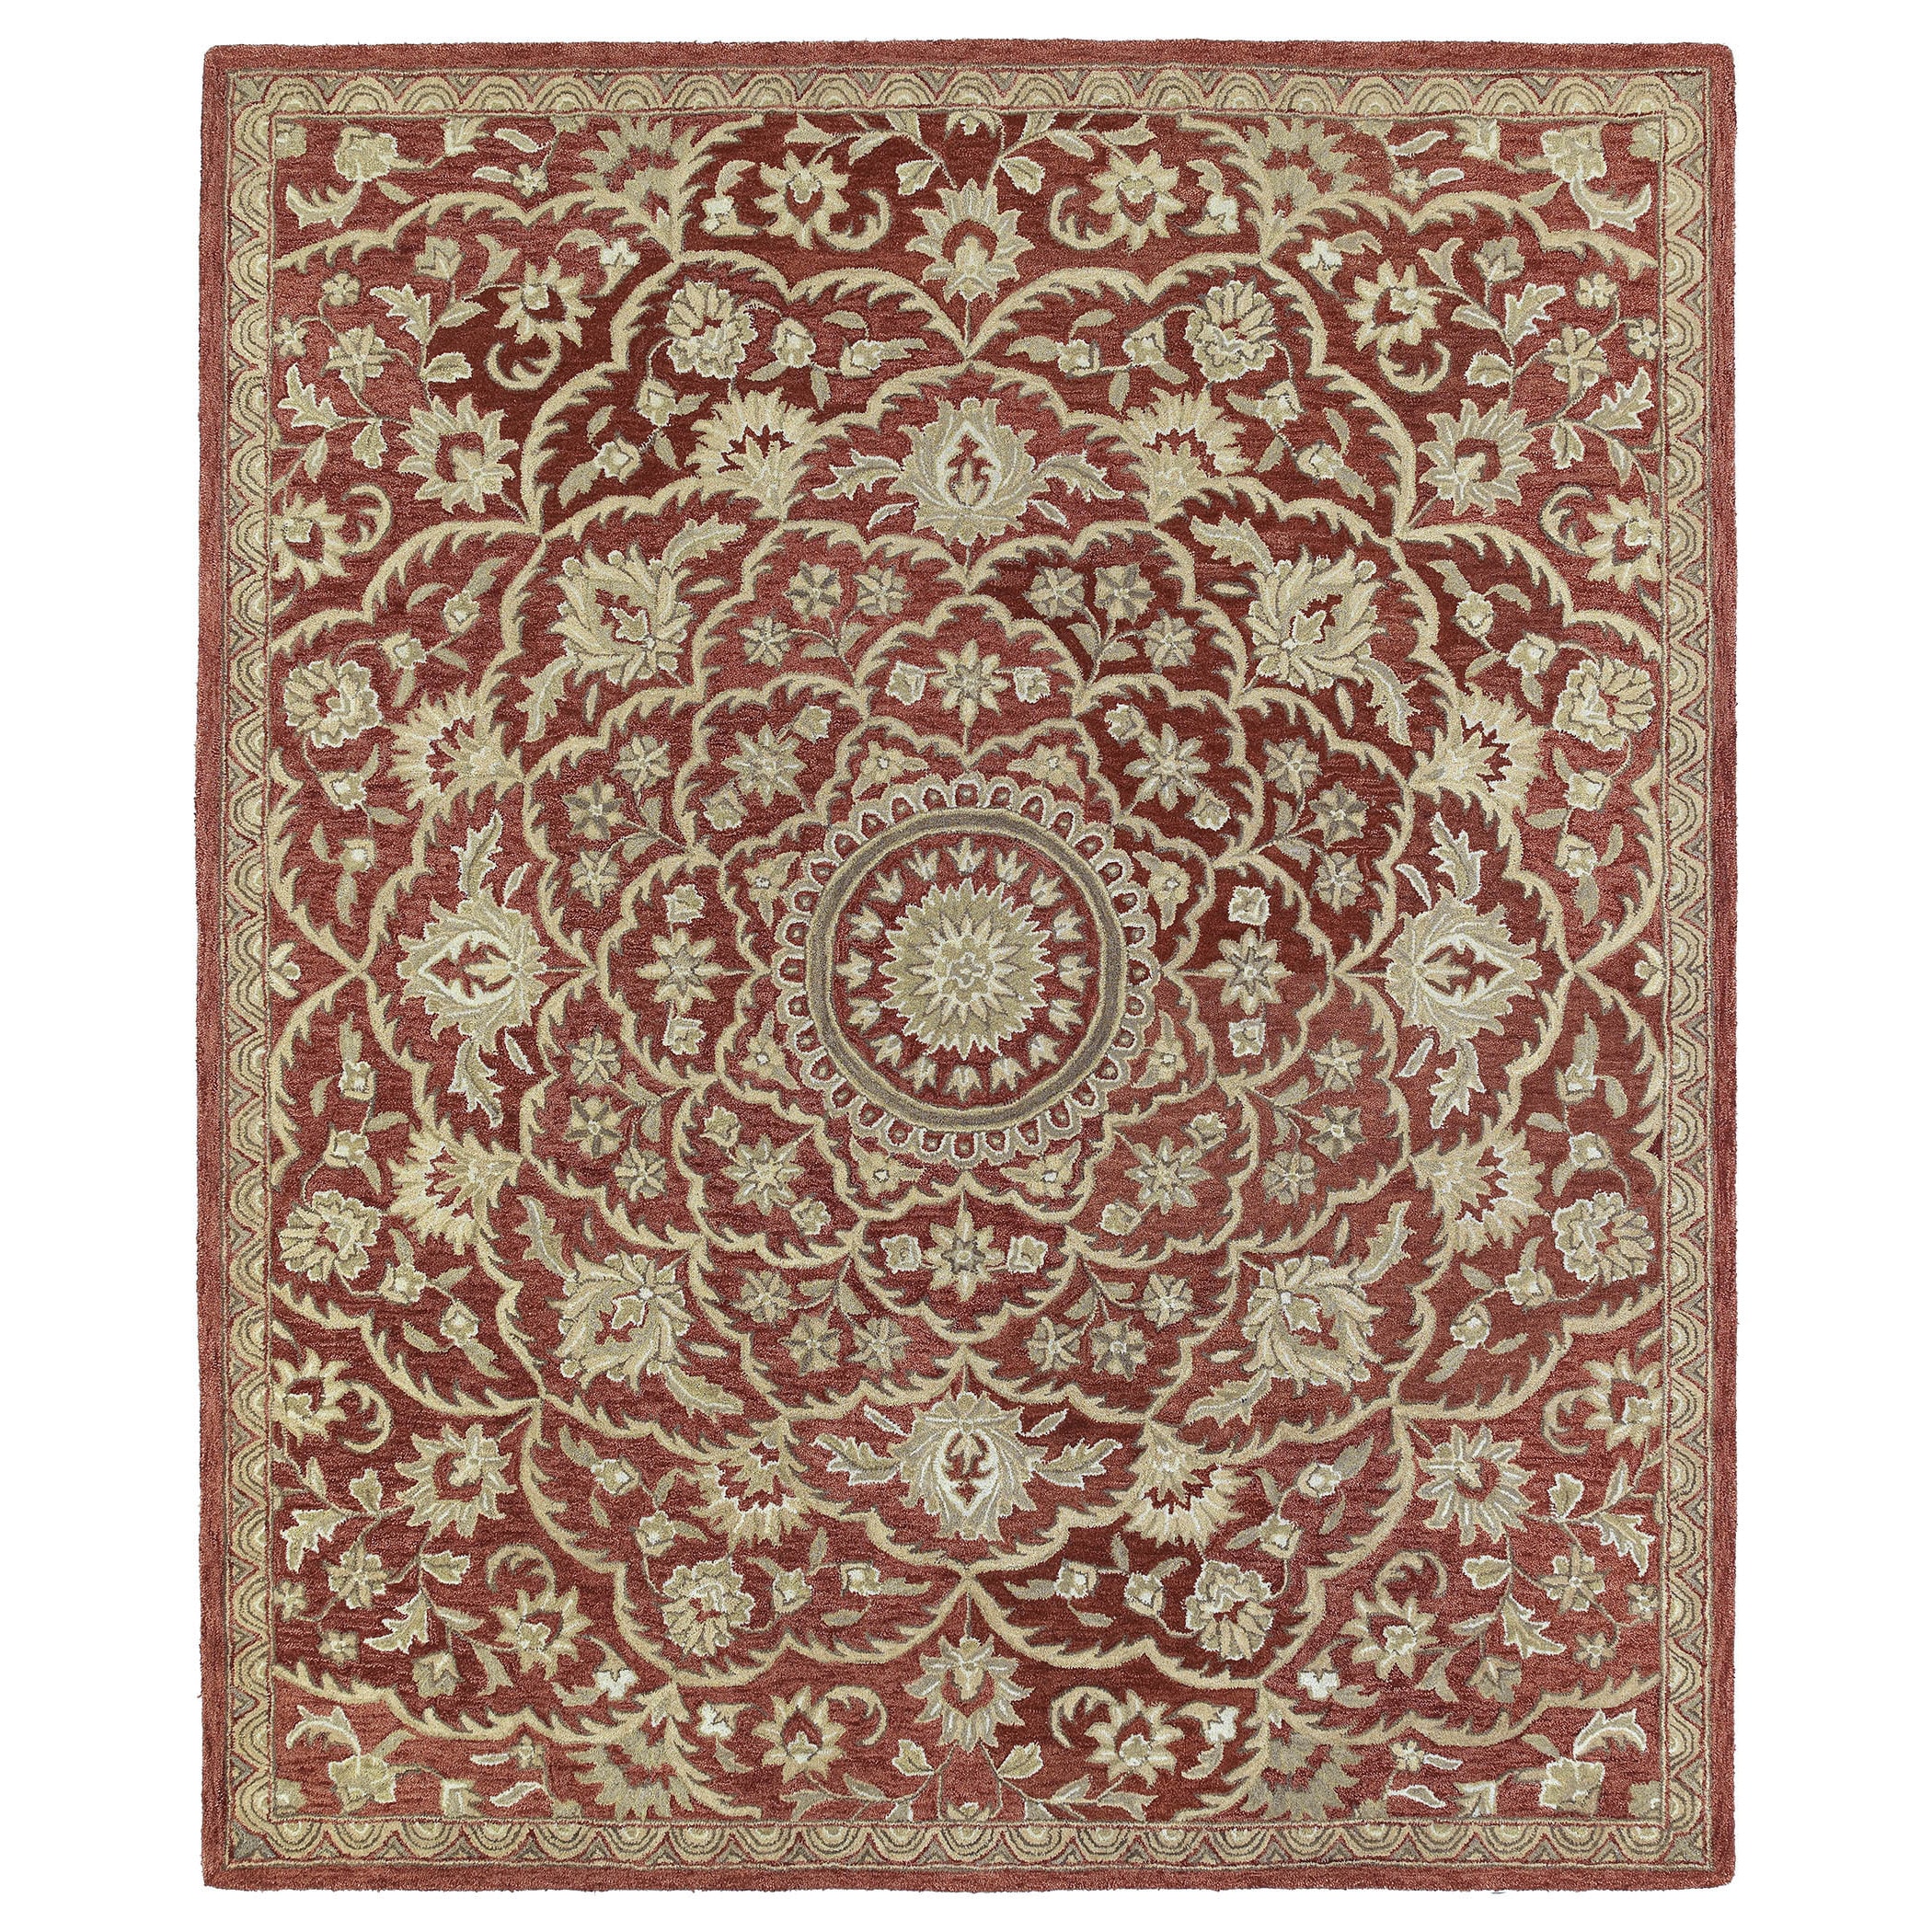 Hand tufted Joaquin Red Medallion Wool Rug (4 X 6)